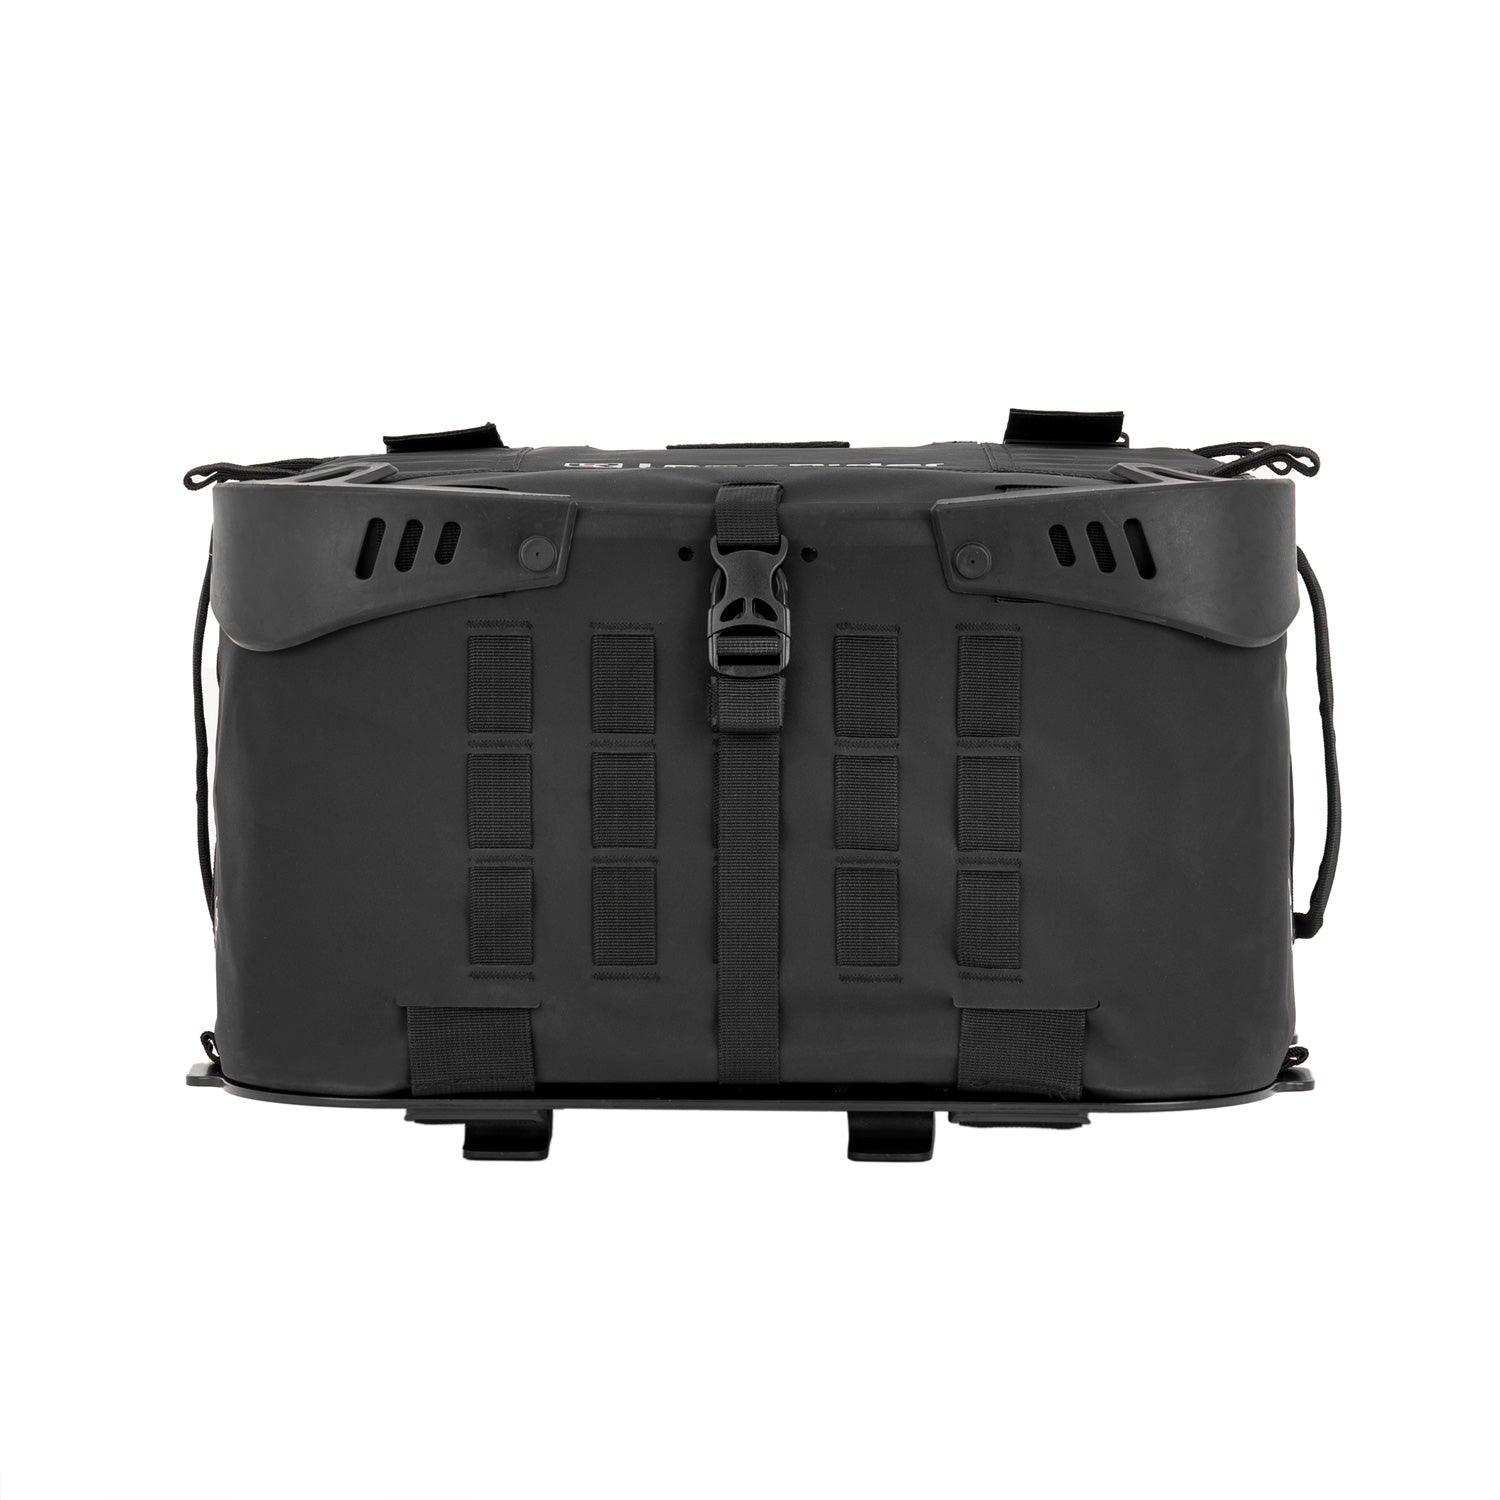 MotoBags by Lone Rider: Adventure Motorcycle Panniers